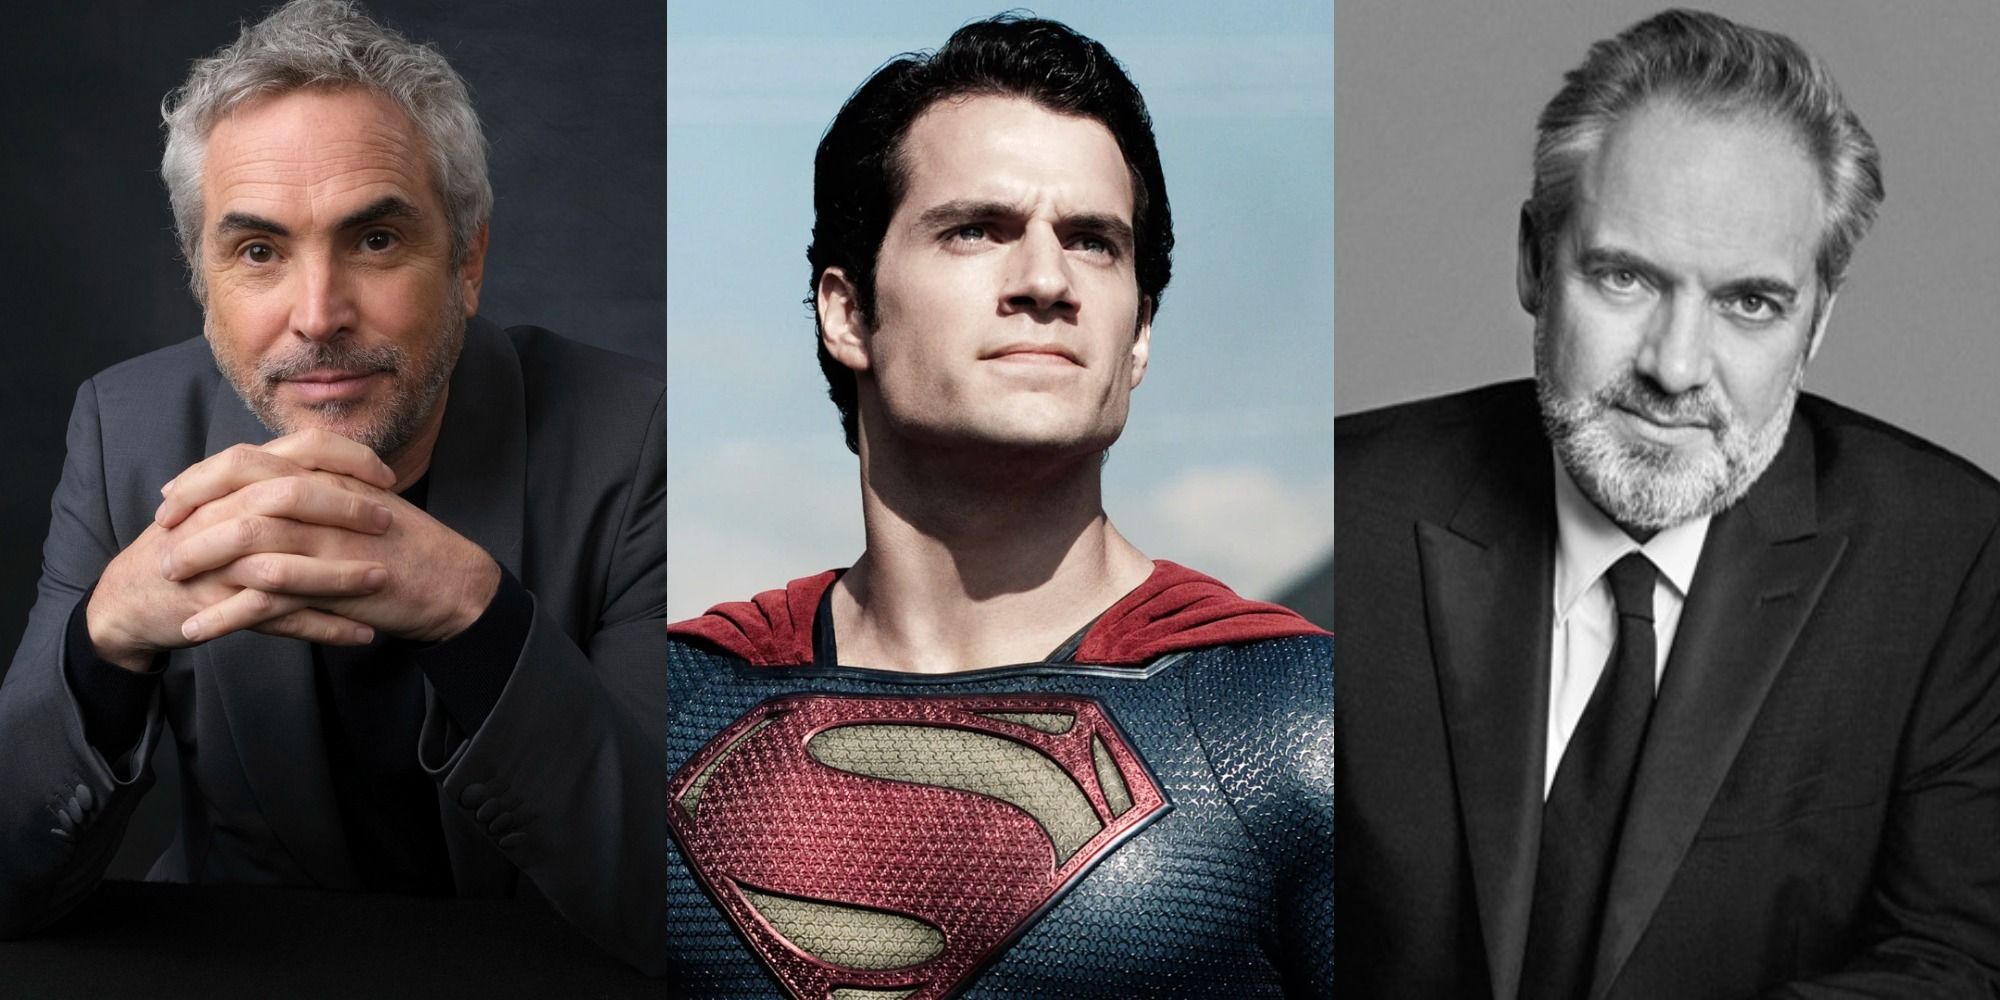 Split image showing Alfonso Cuarón, Henry Cavill in Man of Steel, and Sam Mendes